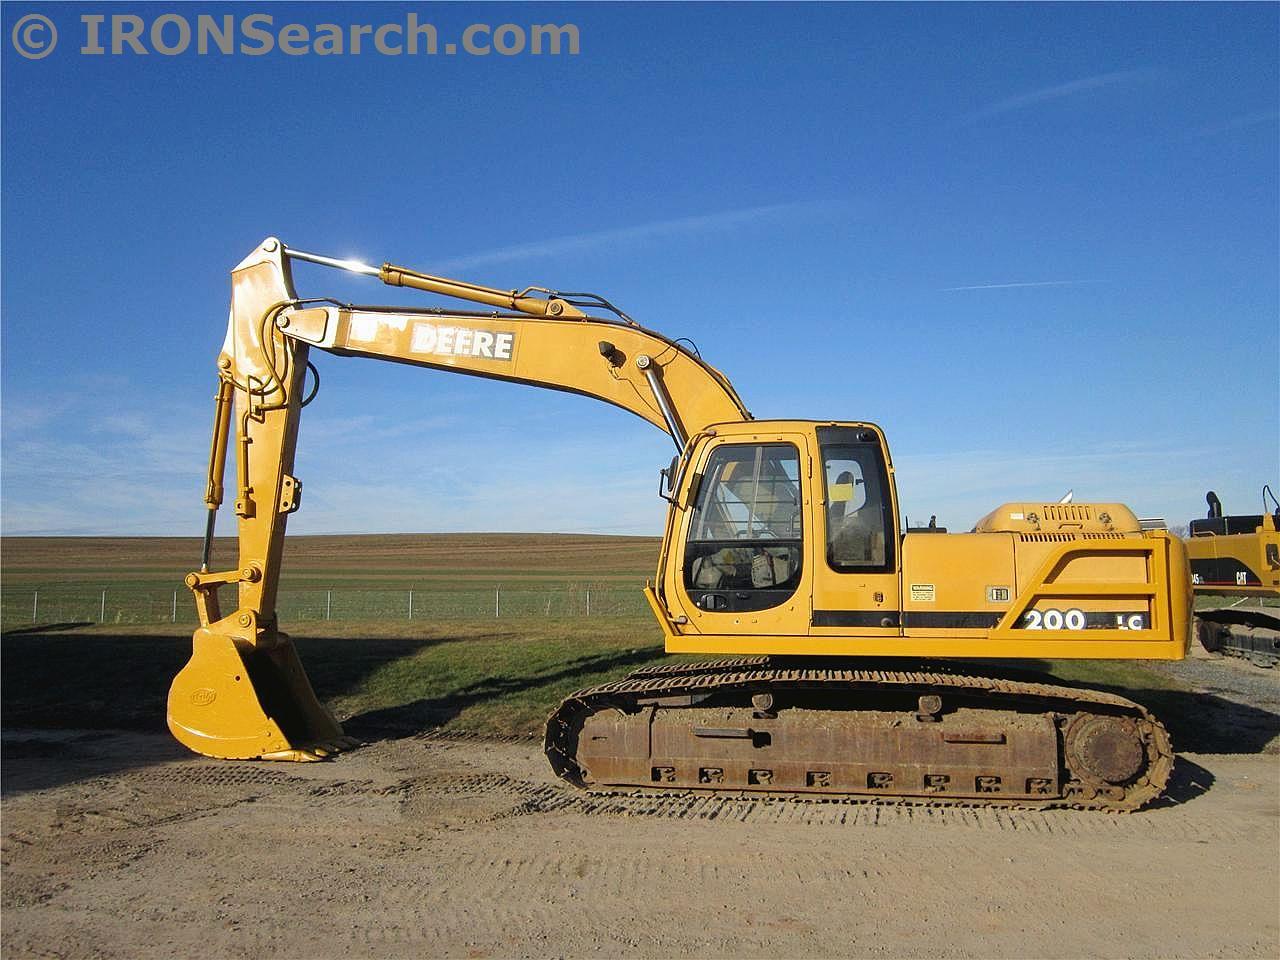 IRON Search - 2001 John Deere 200 LC Excavator For Sale By Weaco ...